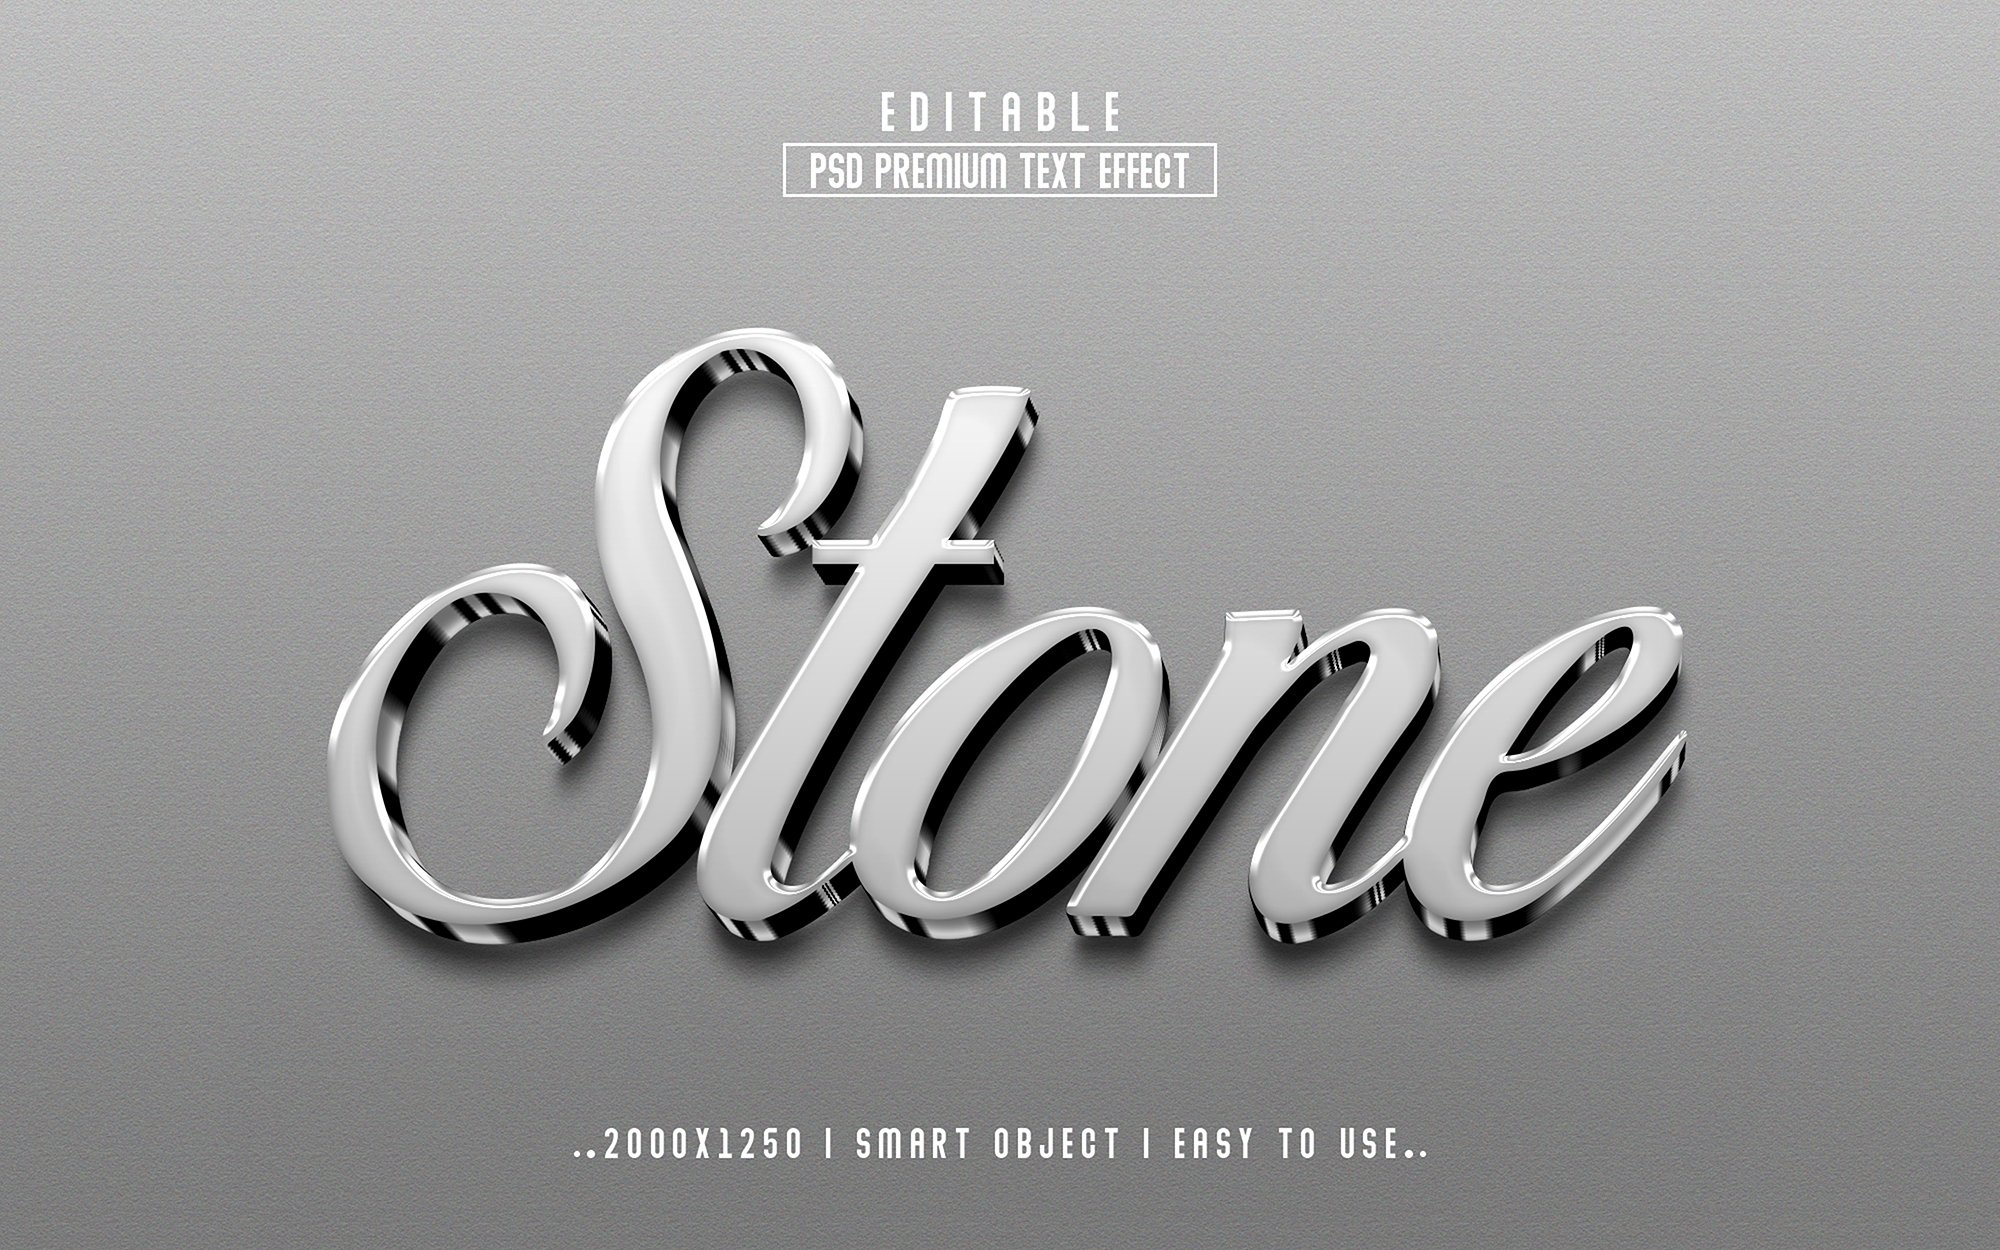 Stone 3D Editable Text Effect stylecover image.